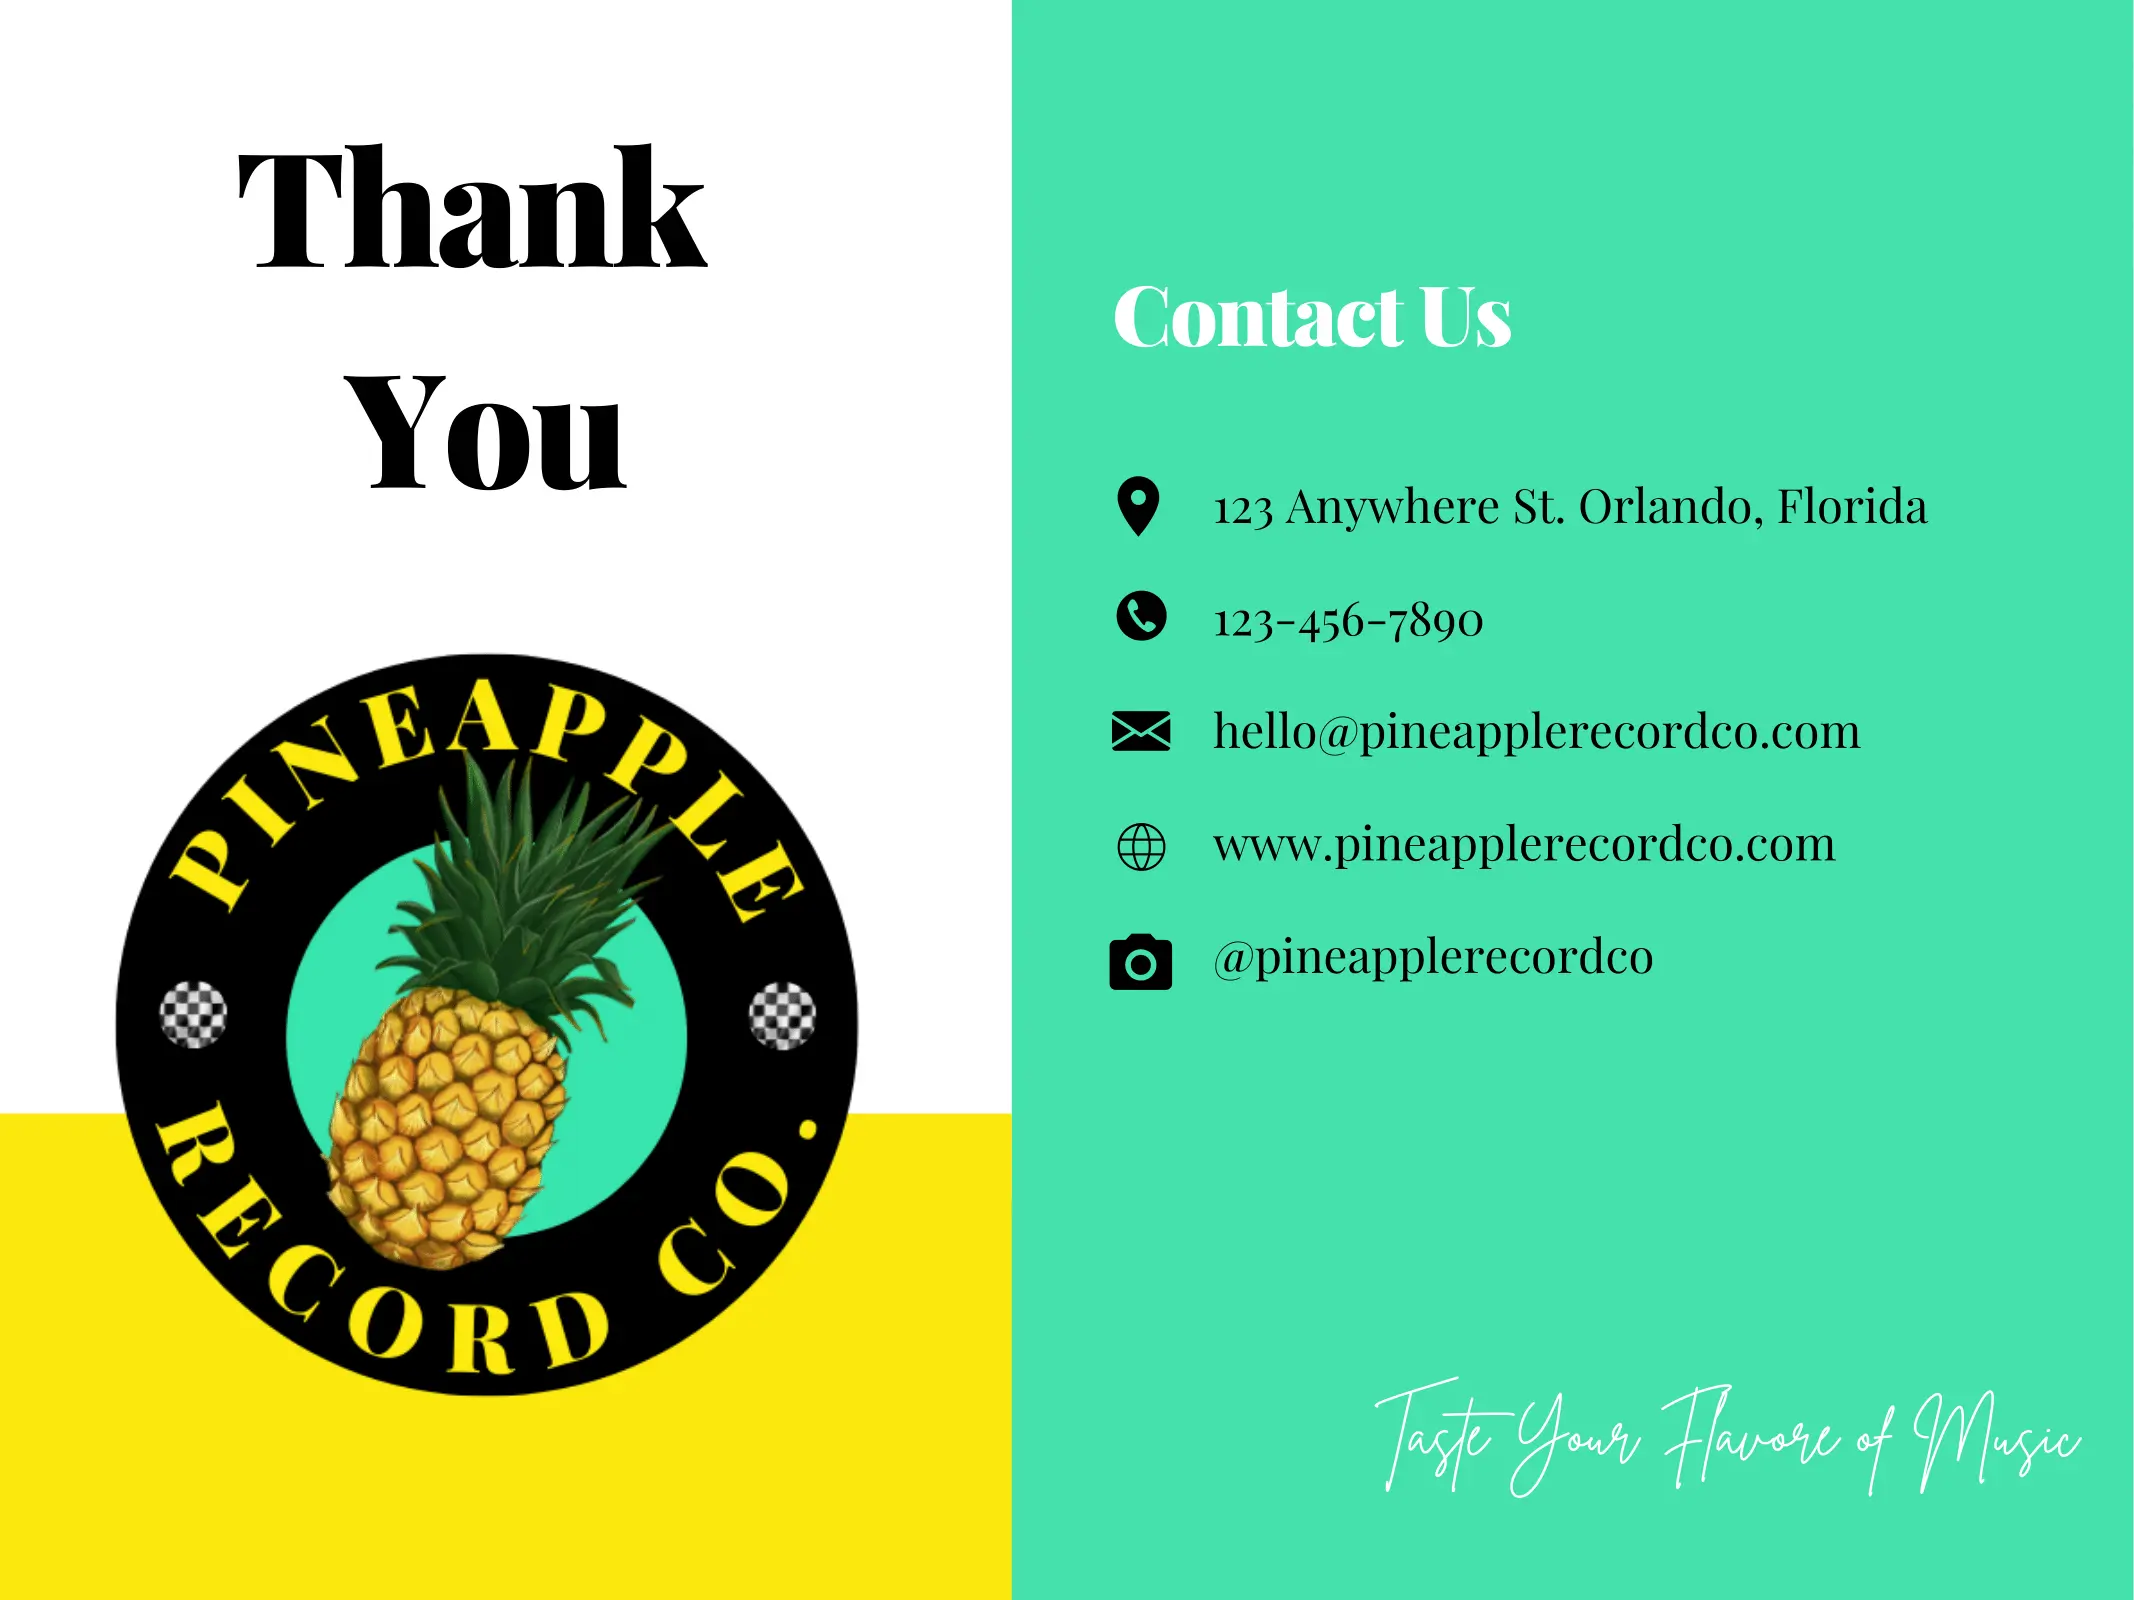 CareerFoundry digital marketing student Haleigh's project, Pineapple Record Co.